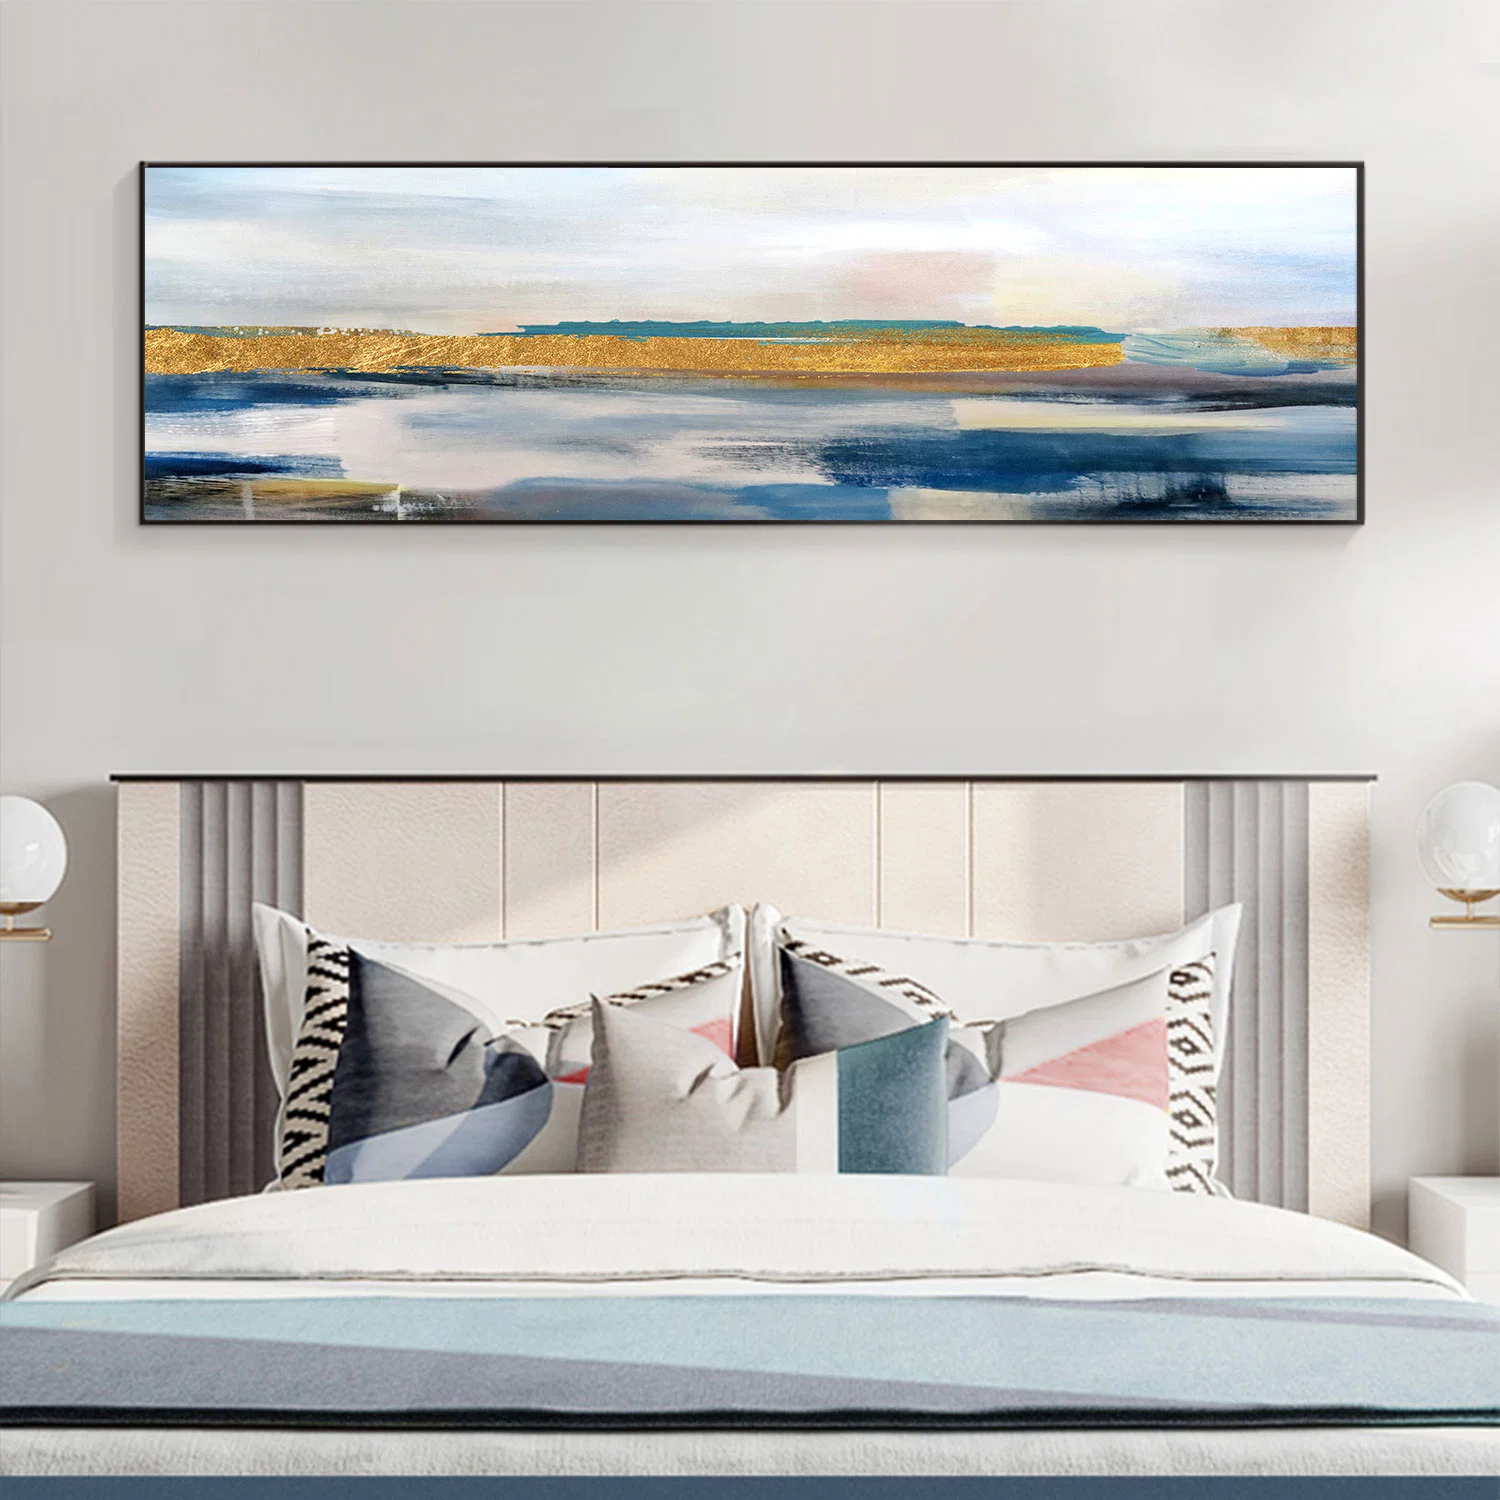 Customized Crystal Porcelain Seascape Headboard Painting Decorative Paintings